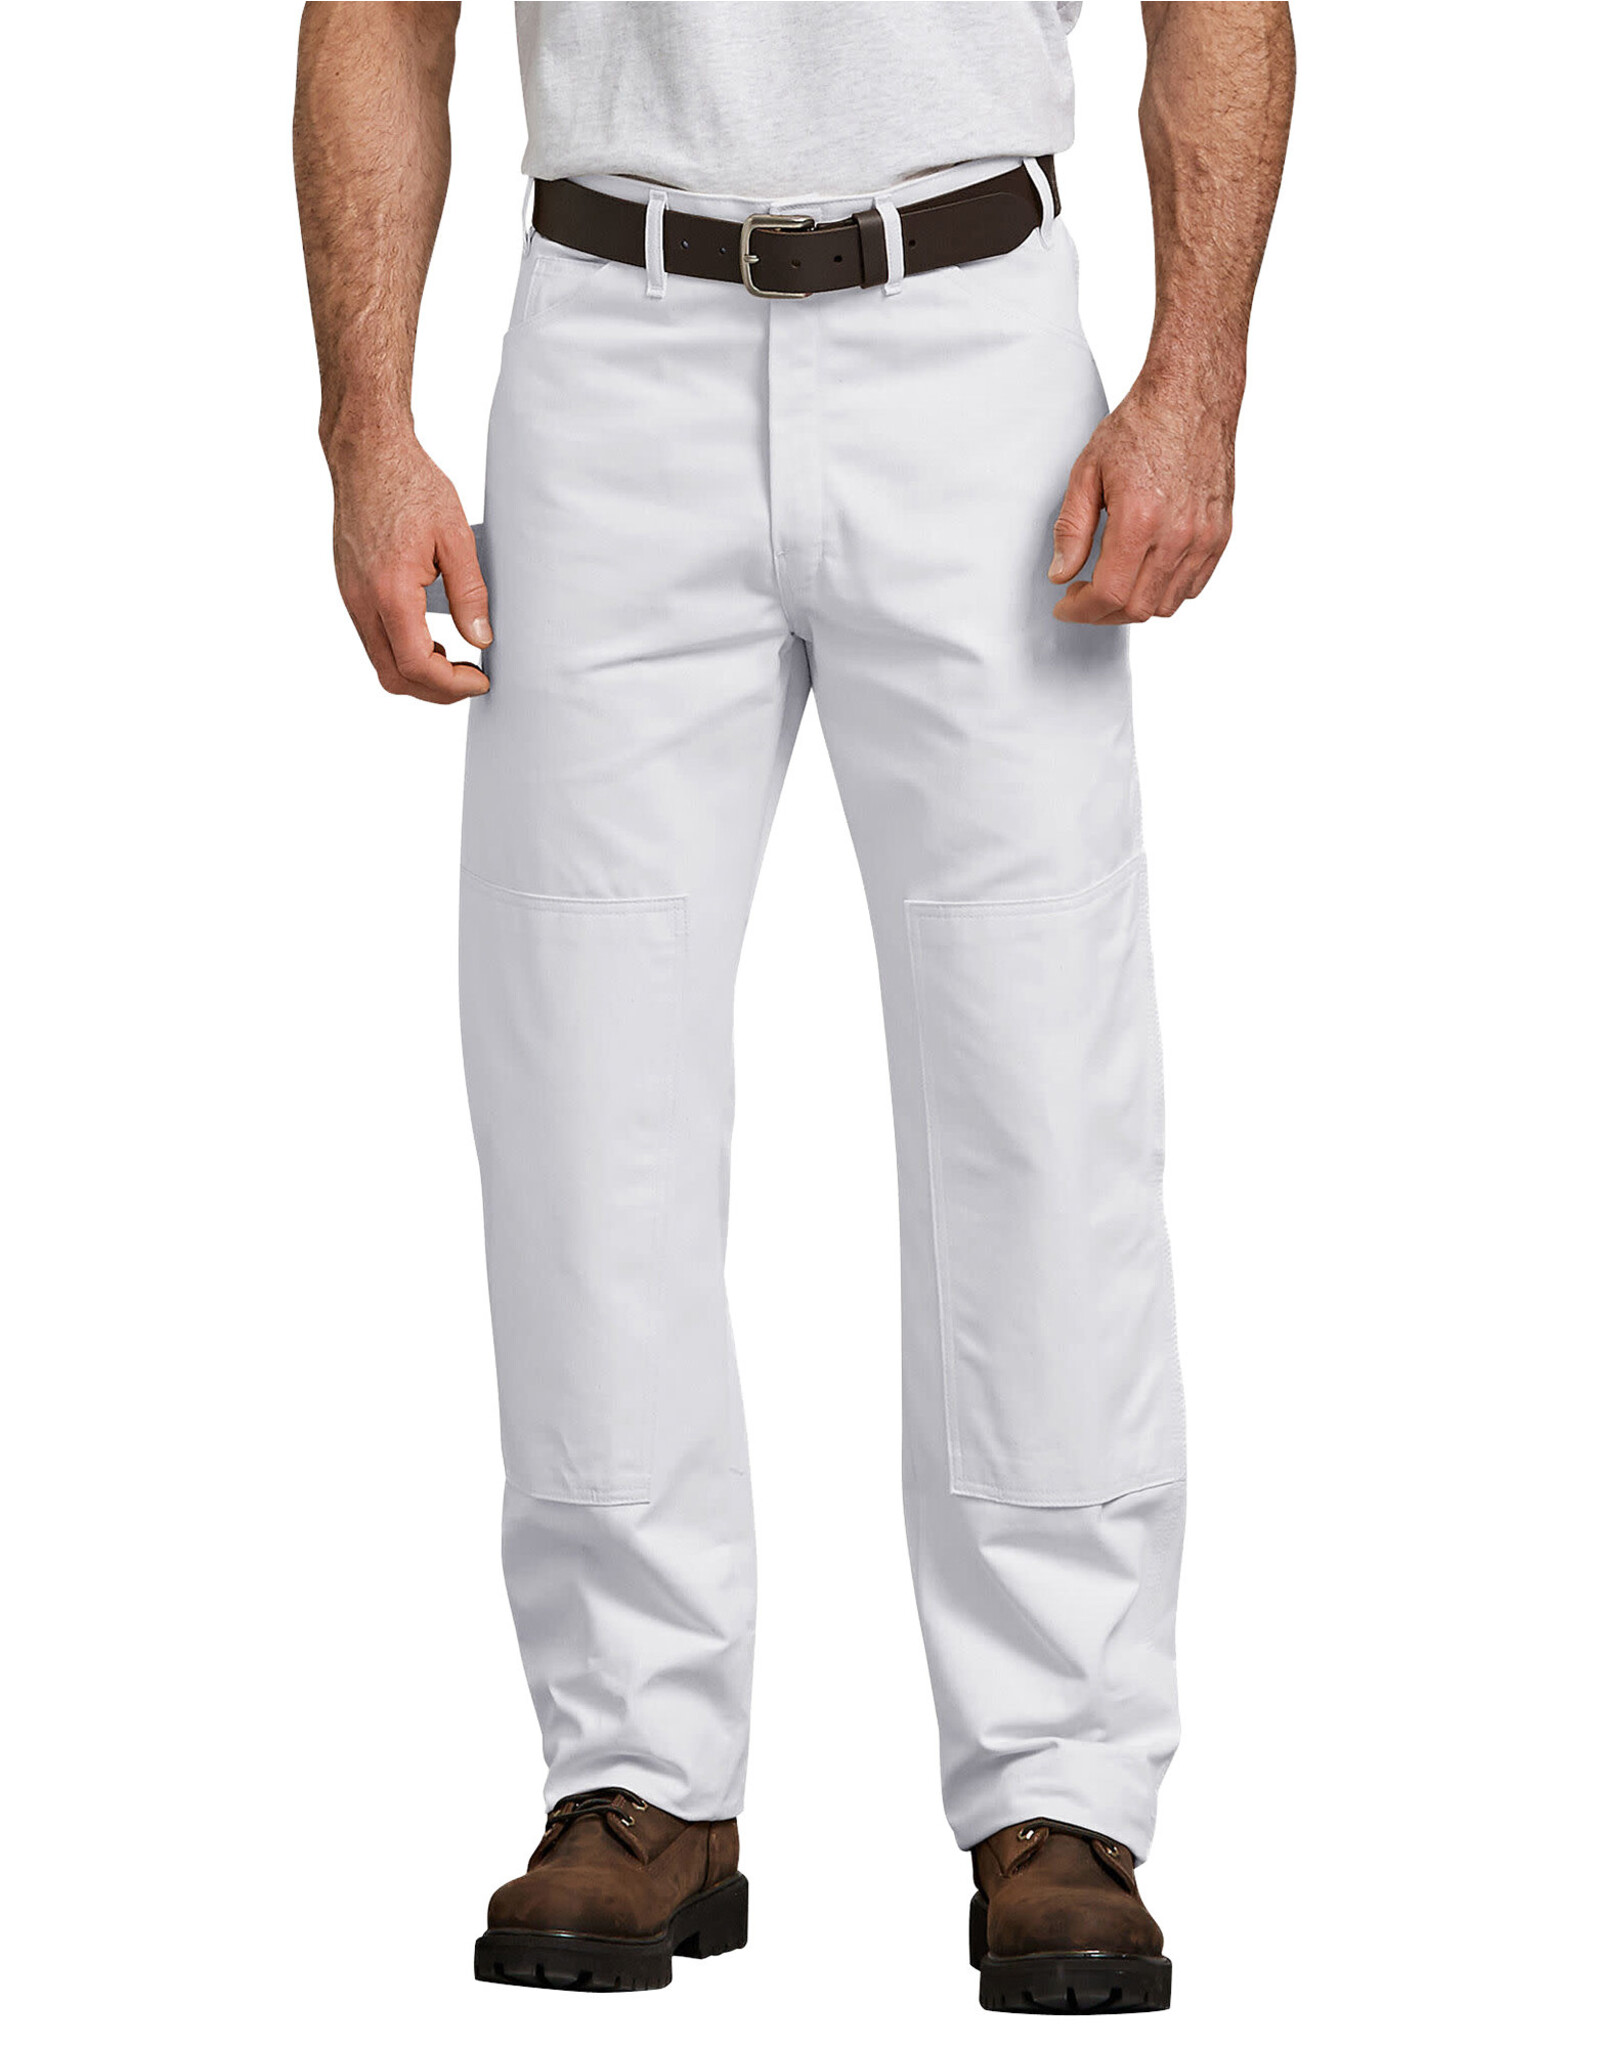 DICKIES Painter's Double Knee Utility Pants White - 2053WH